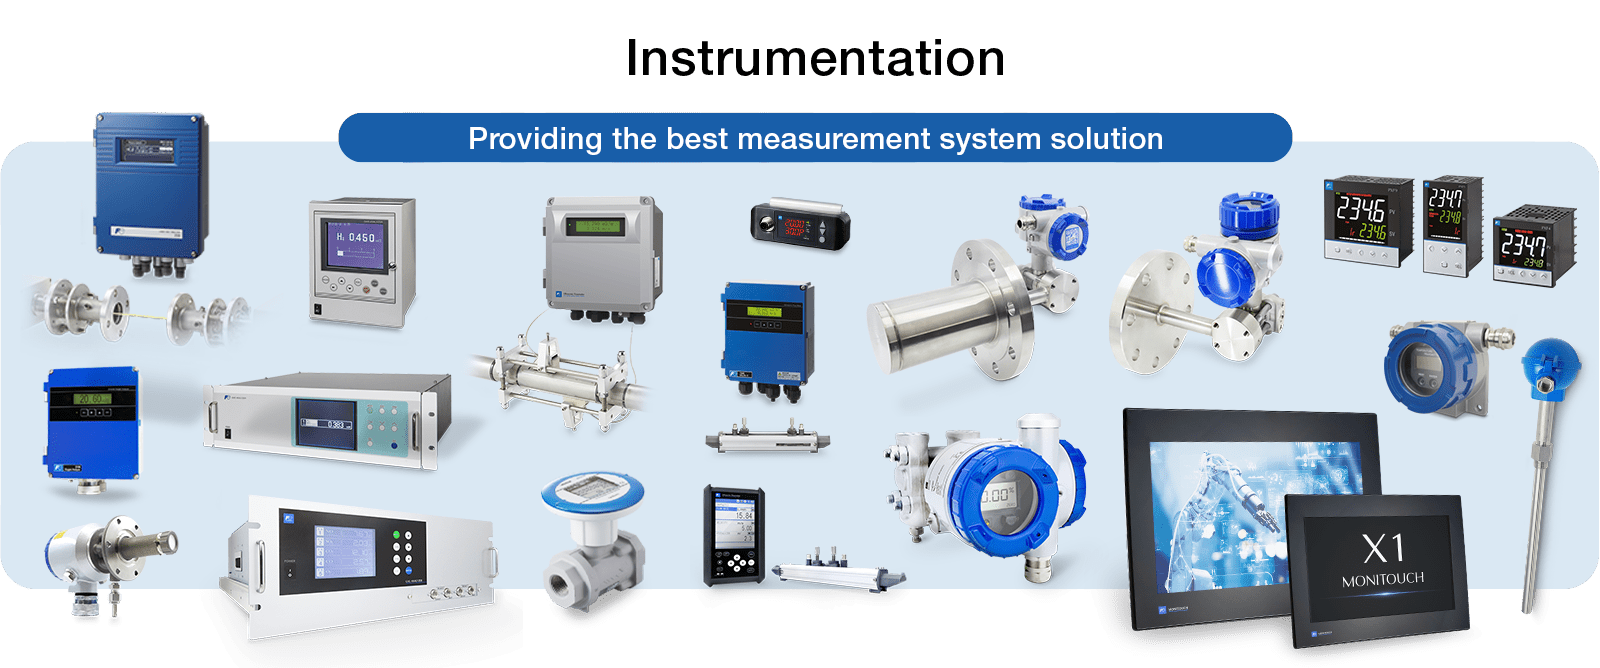 instruments and measuring devices